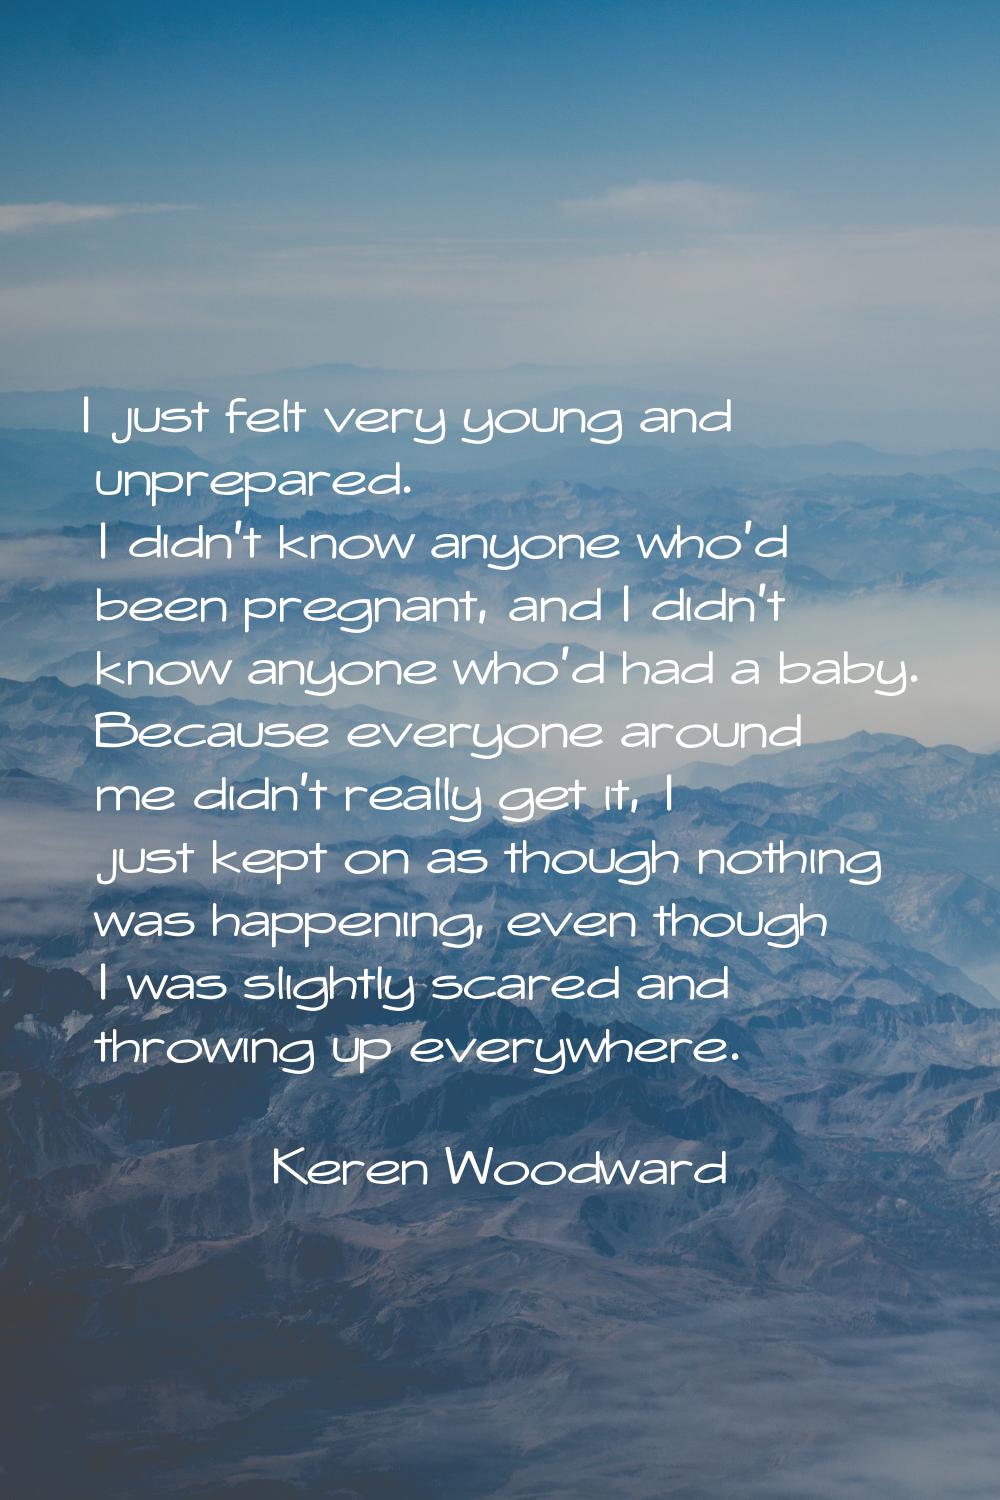 I just felt very young and unprepared. I didn't know anyone who'd been pregnant, and I didn't know 